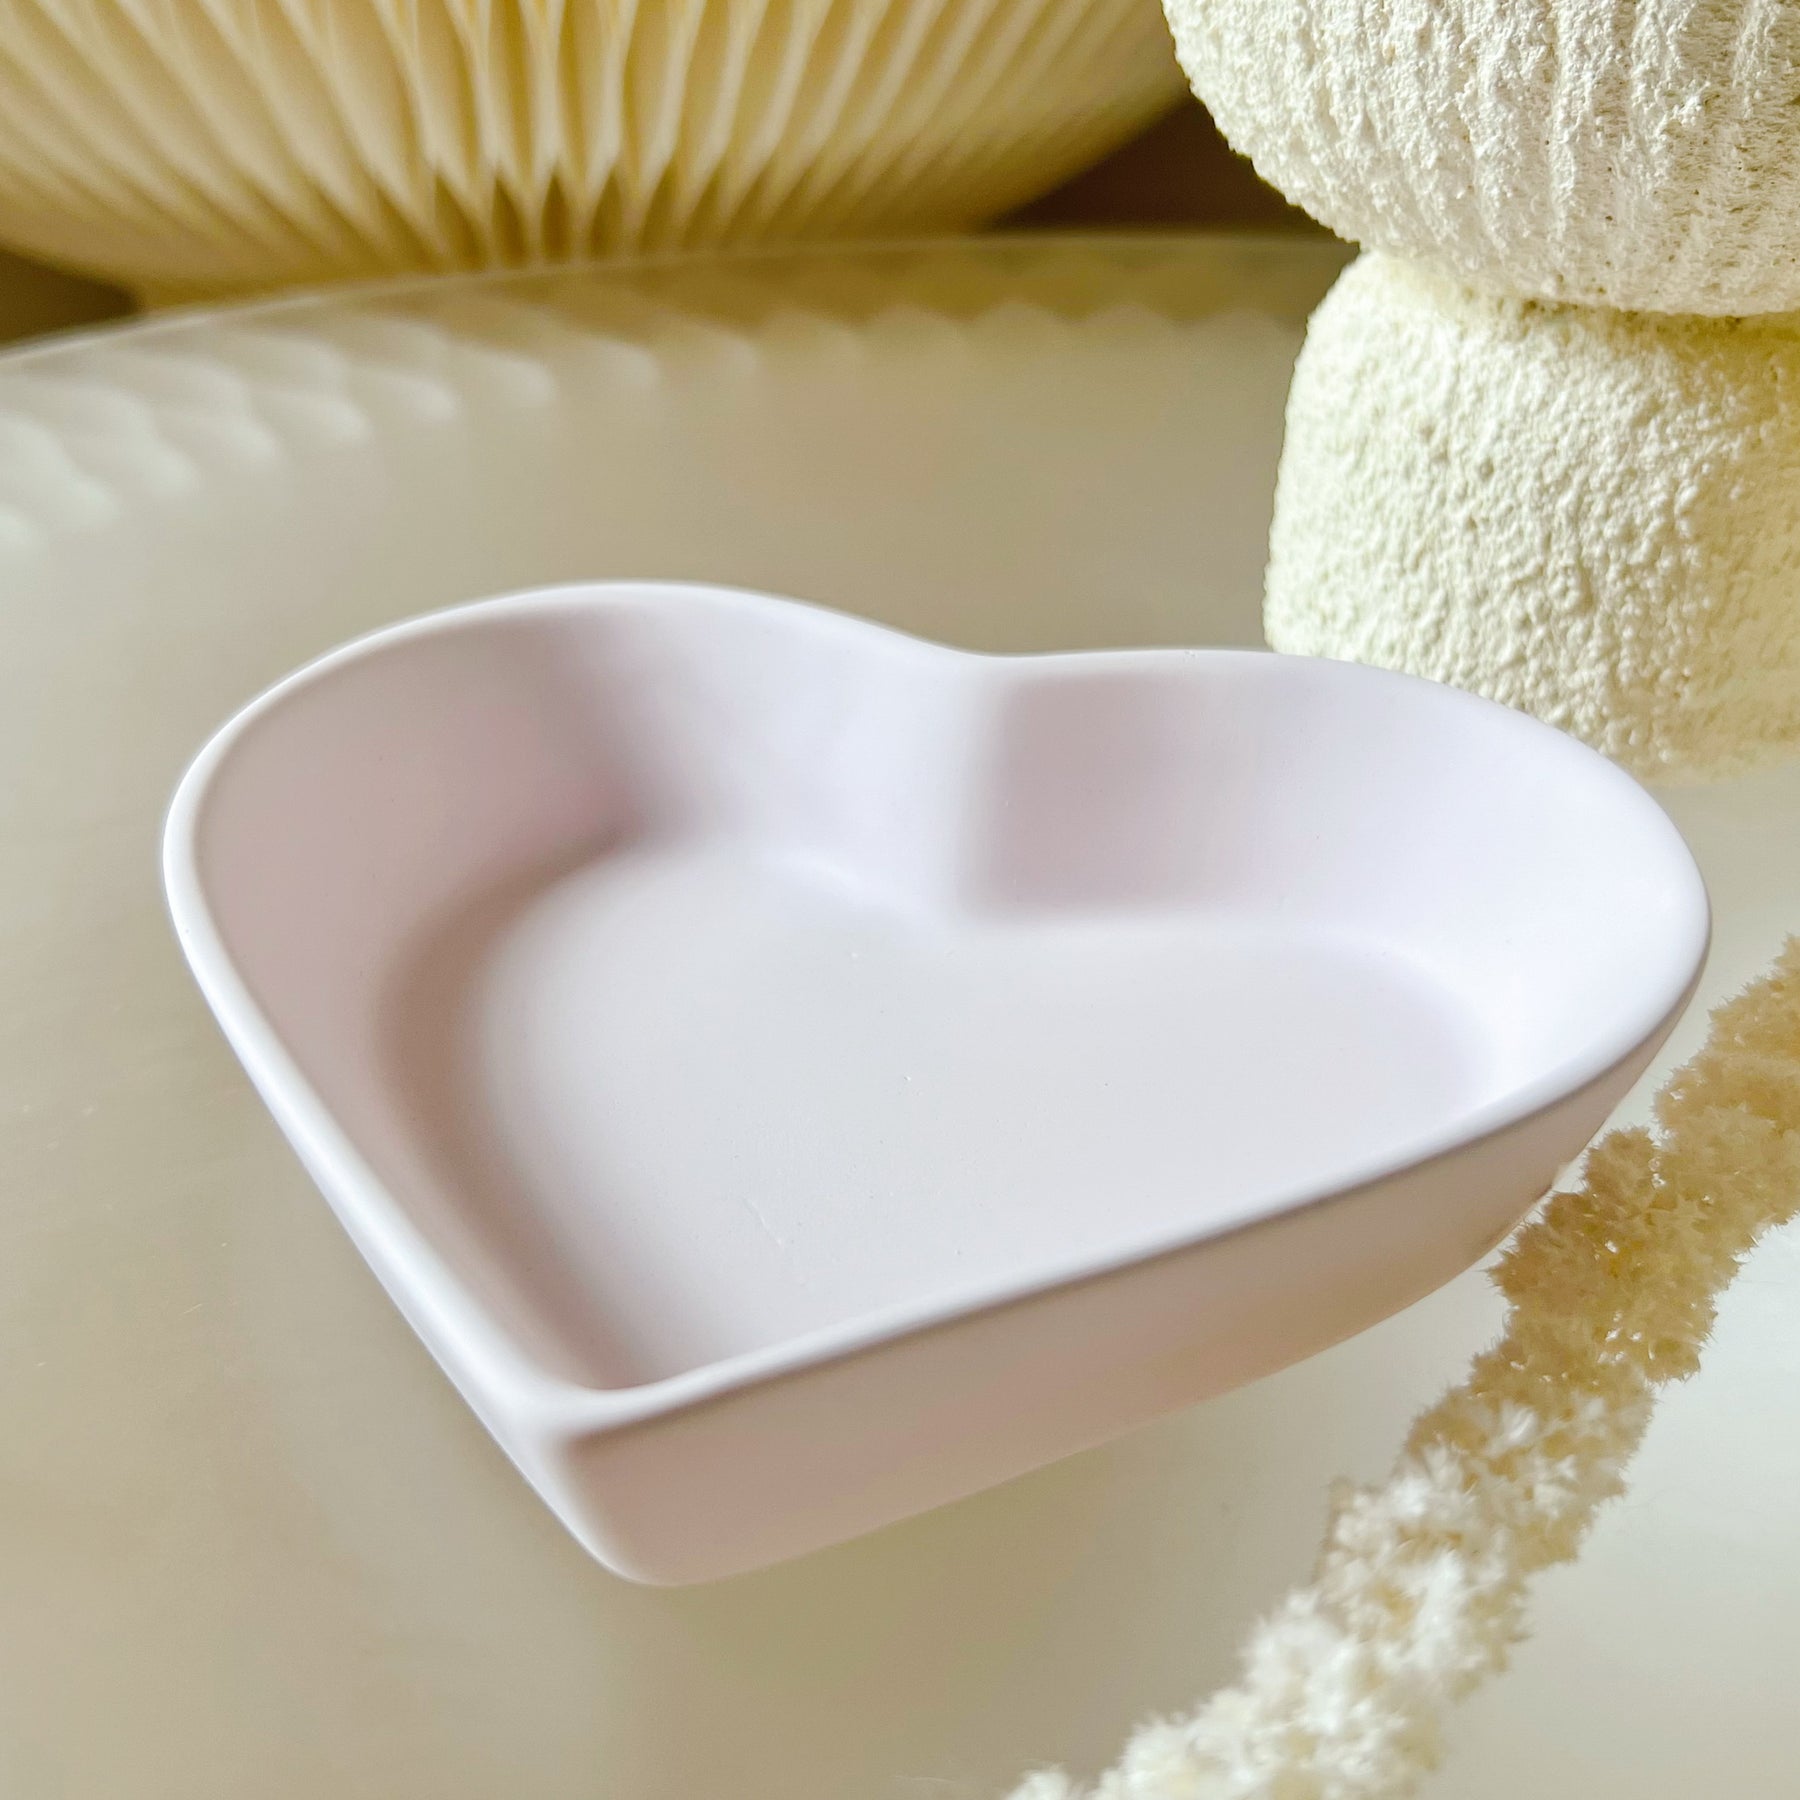 Handcrafted Small Heart Shaped Tray | Trinket Dish | LMJ Candles